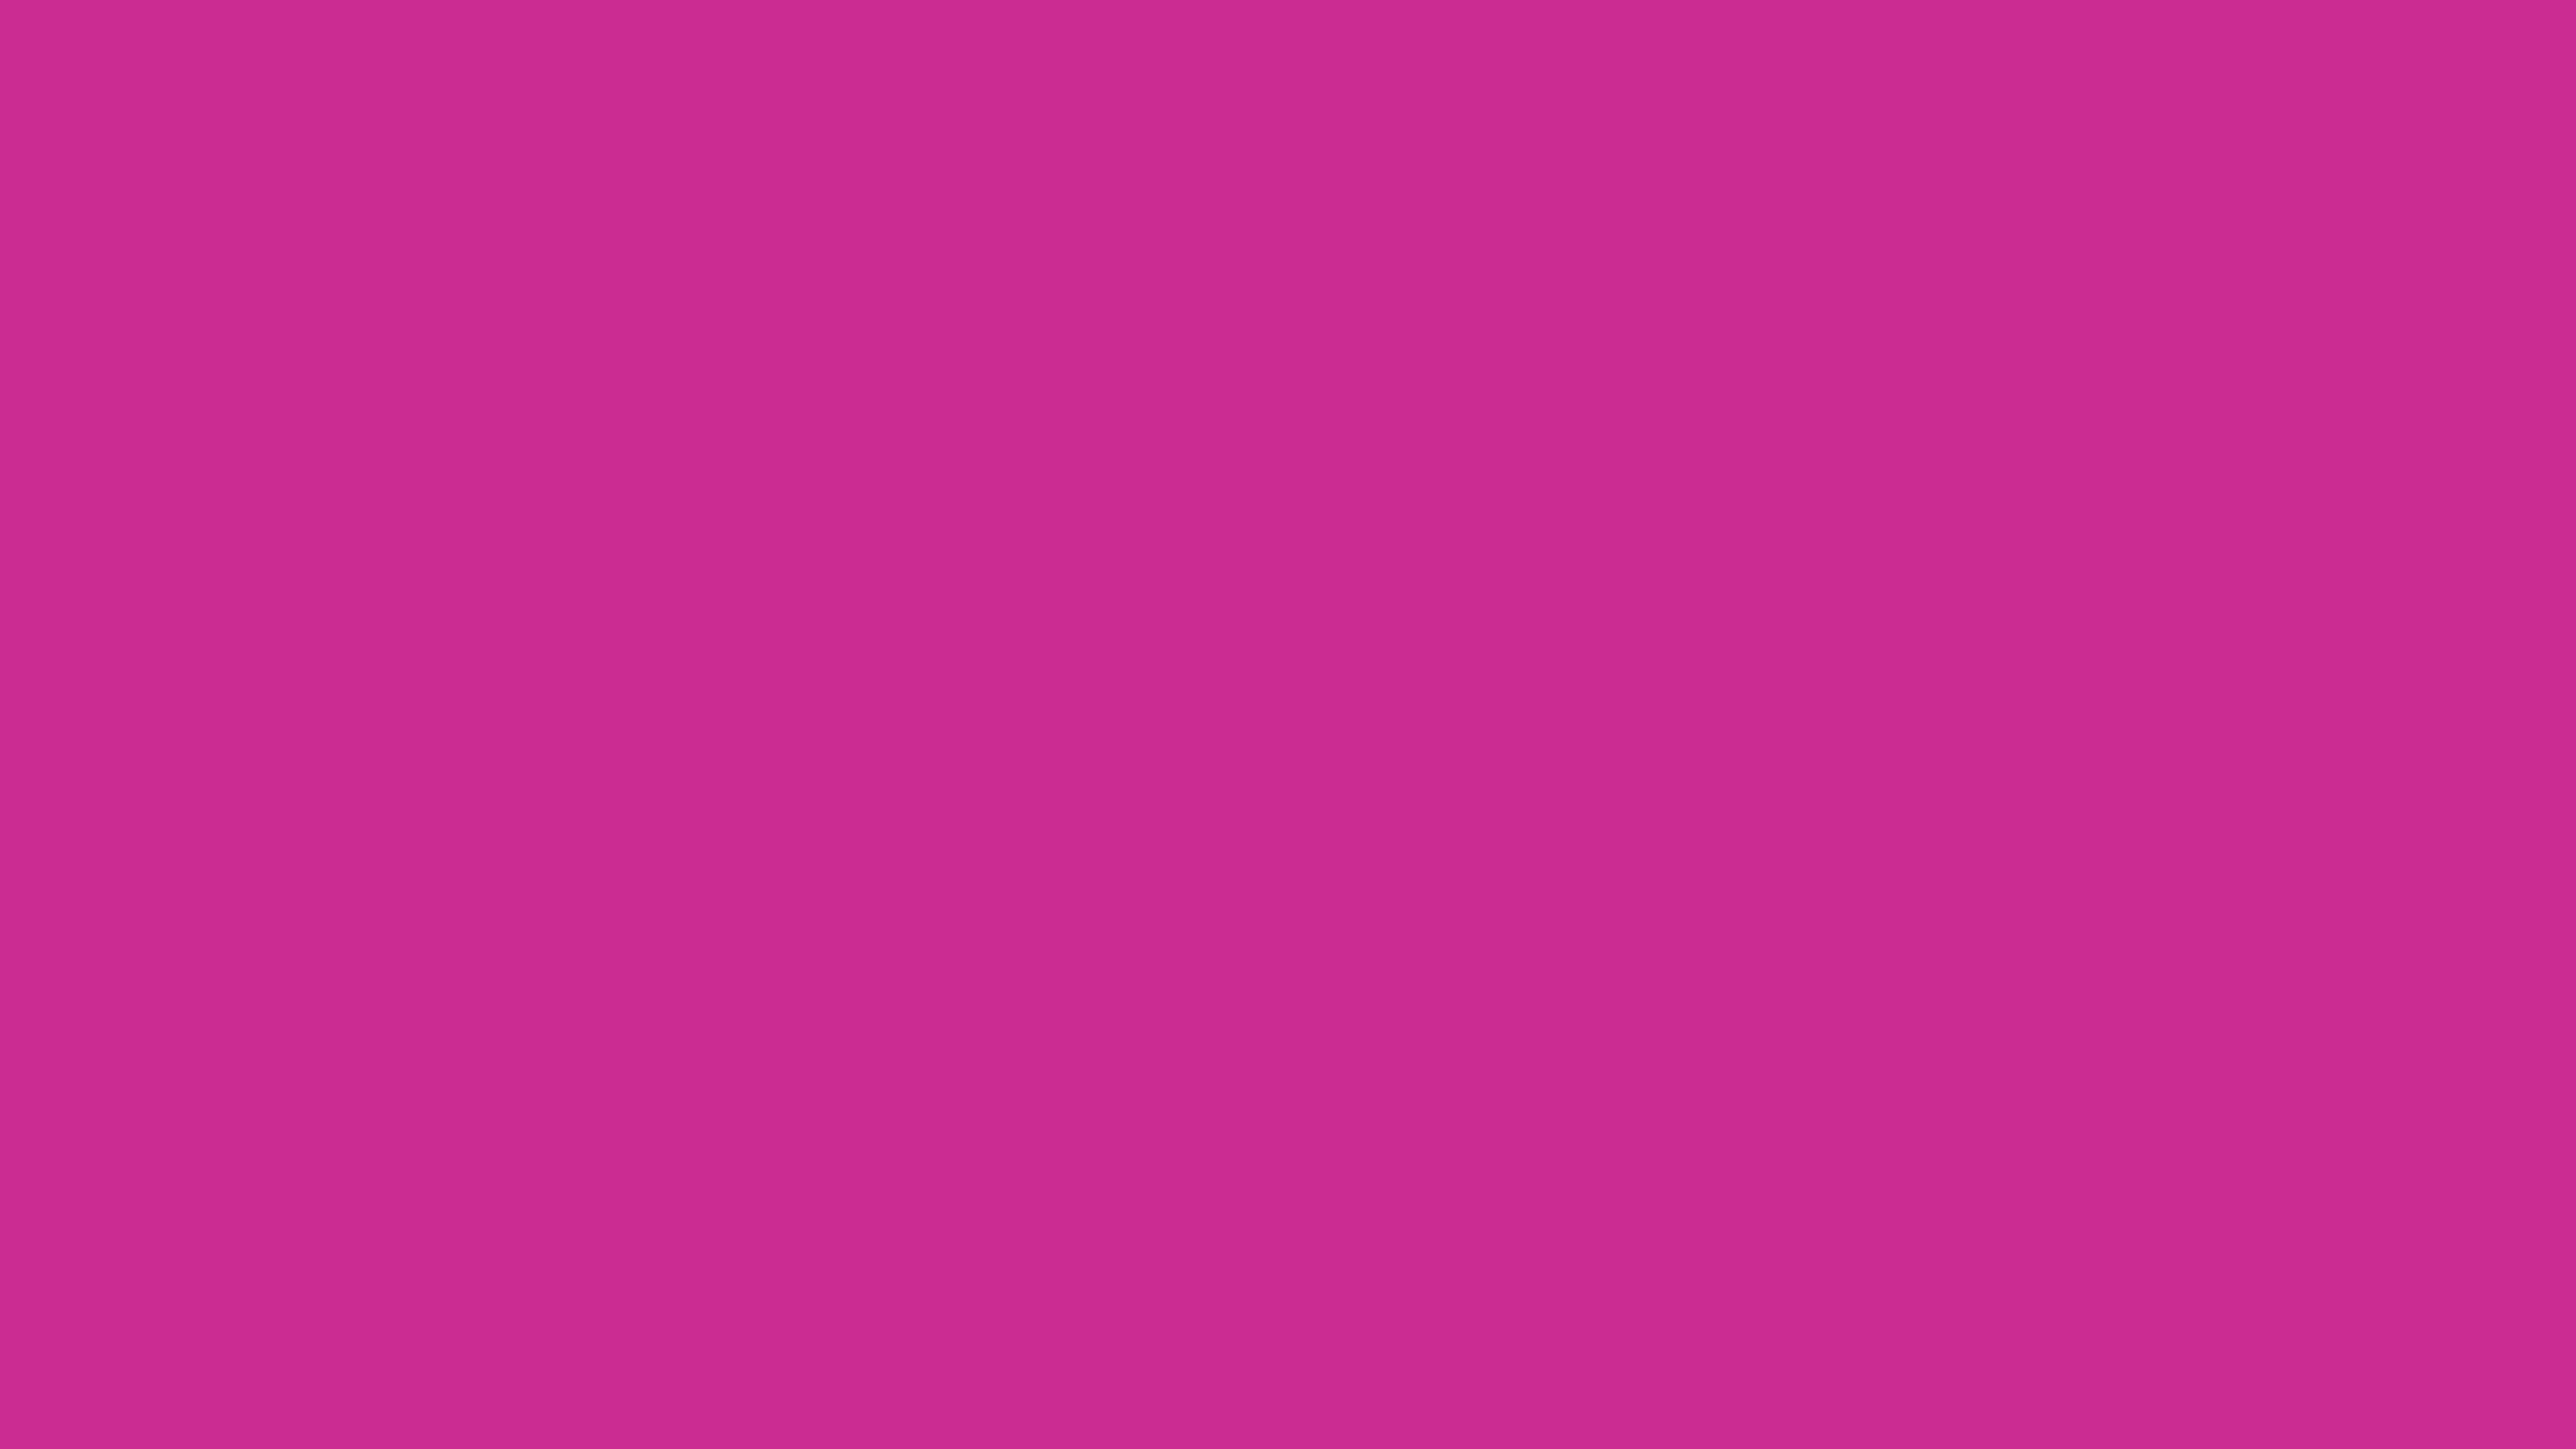 7680x4320 Royal Fuchsia Solid Color Background